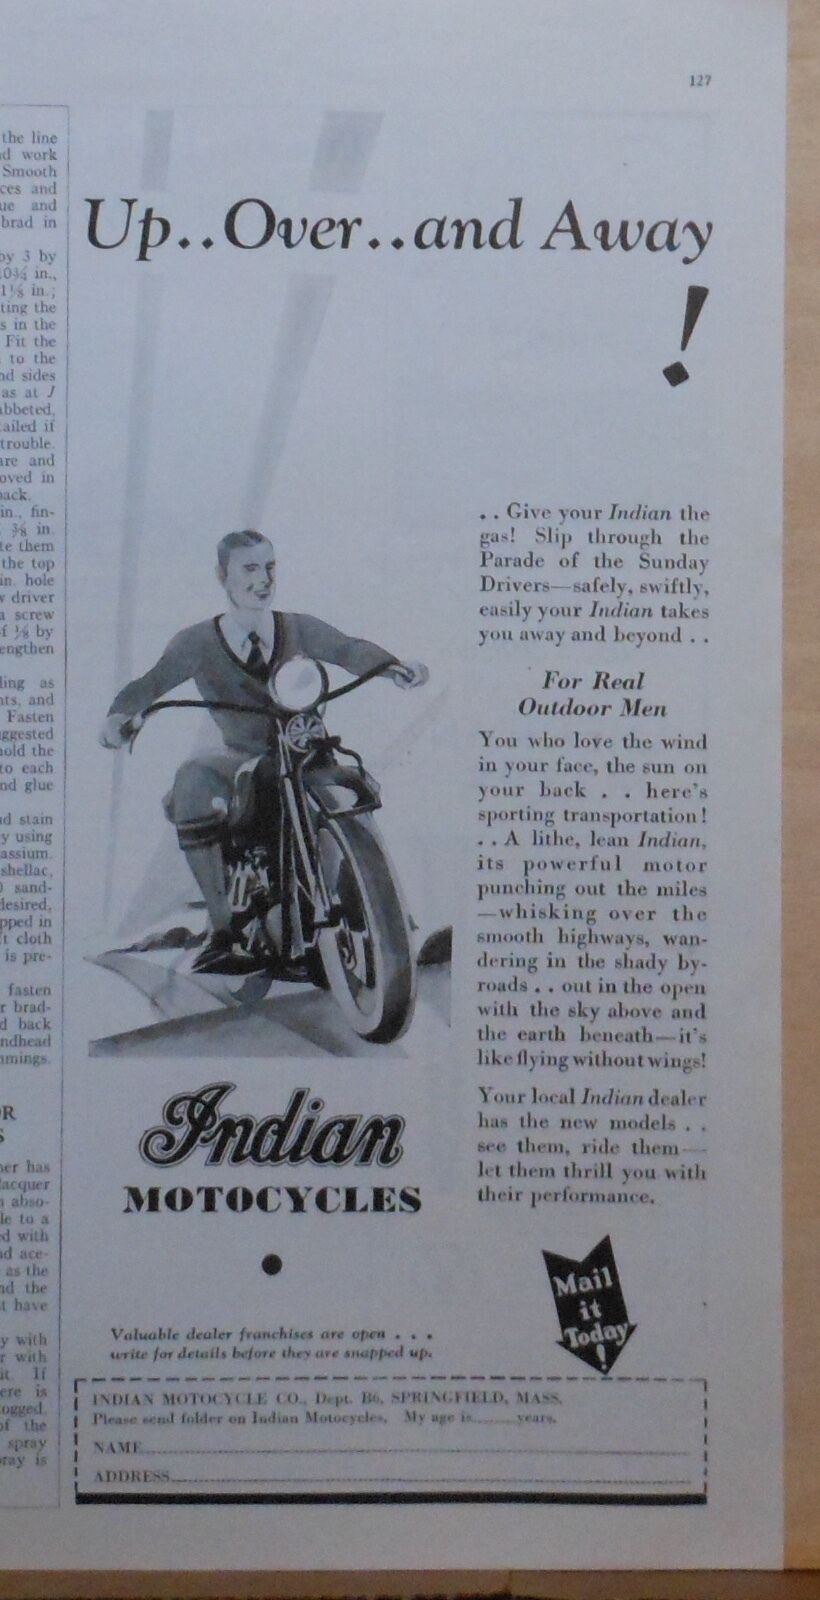 1931 magazine ad for Indian Motorcycles - Up Over and Away, For Real Outdoor Men